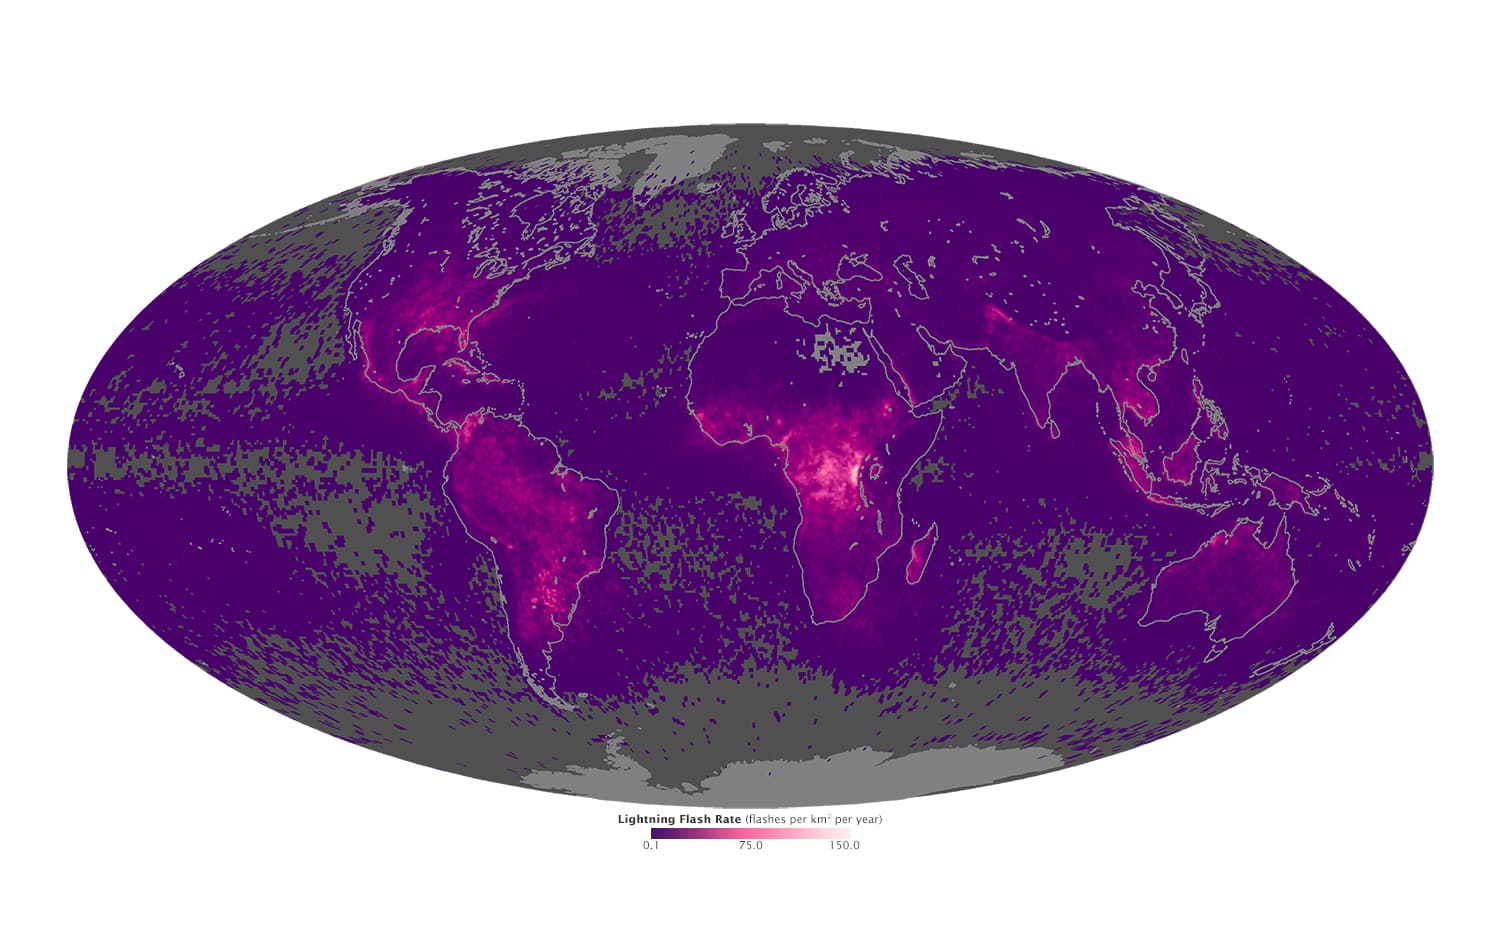 Where lightning strikes most on the planet